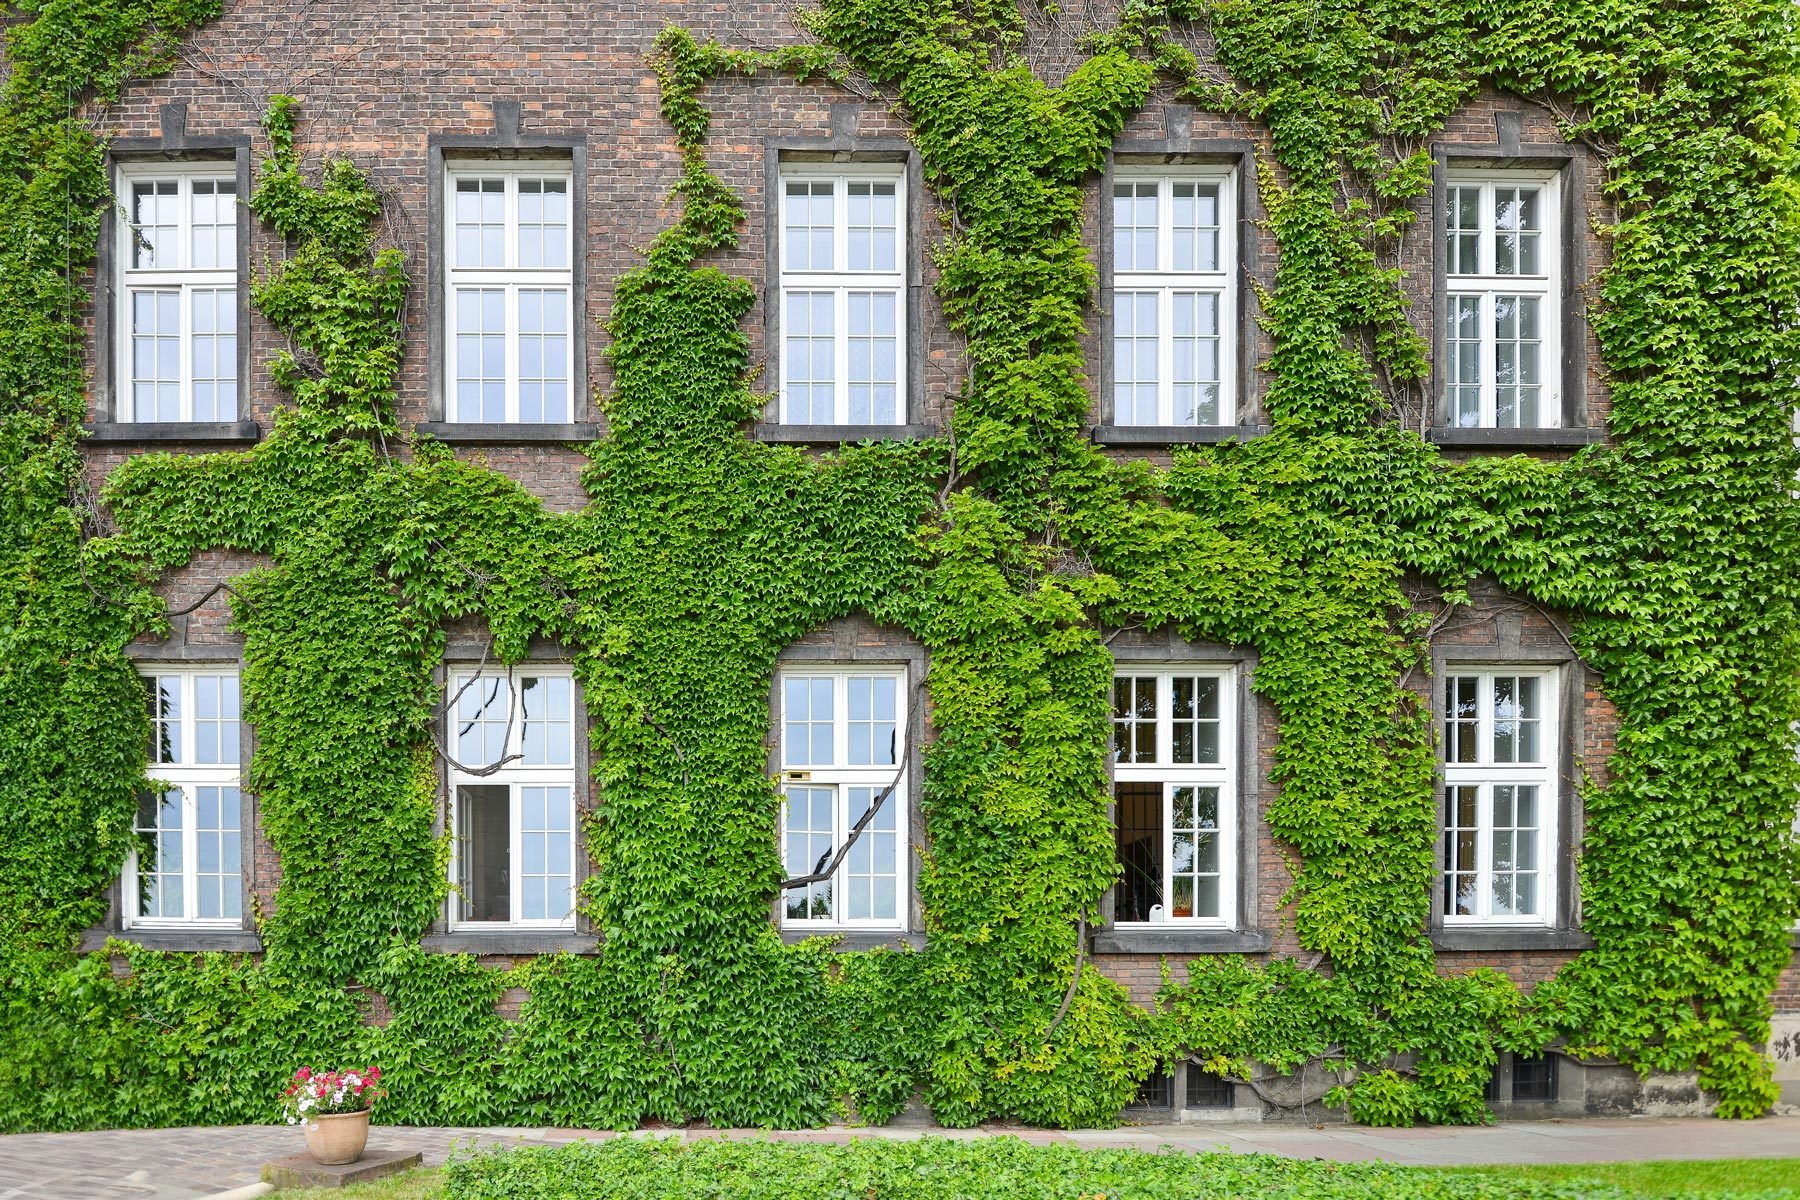 Is It Safe to Plant Climbing Vines On Your House?